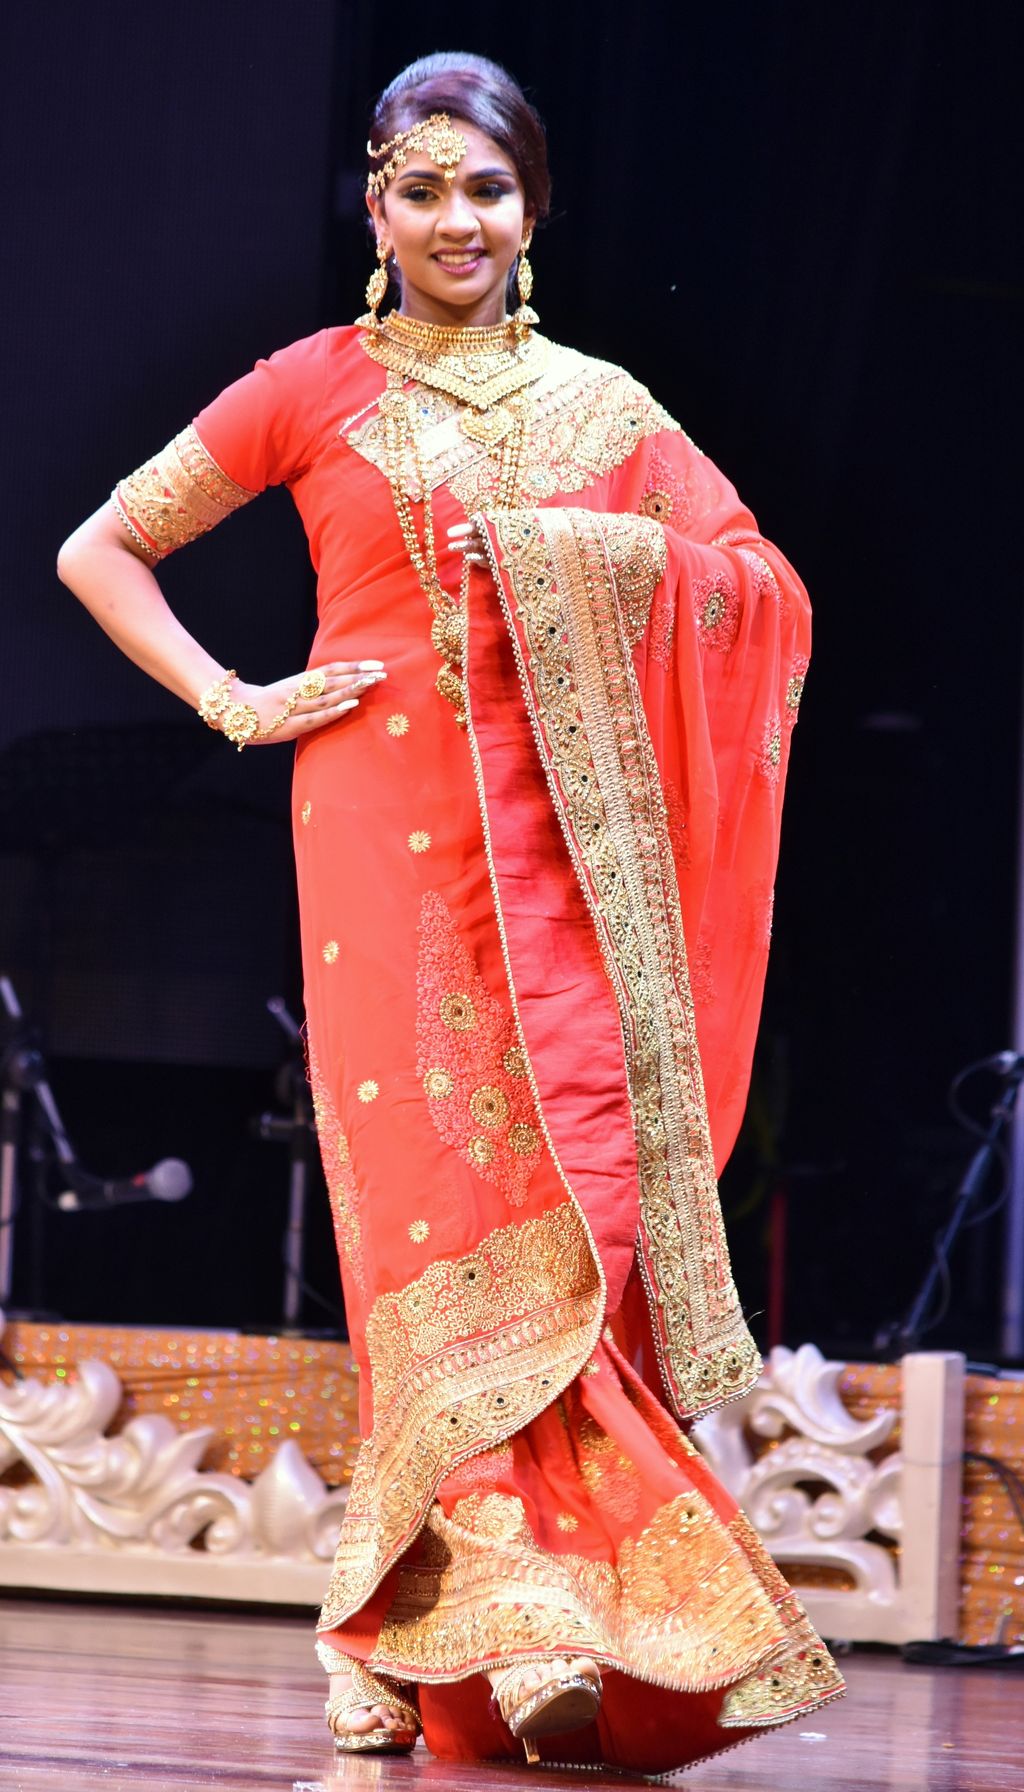 Miss Photogenic Marina Mohan models her sari during the competition.